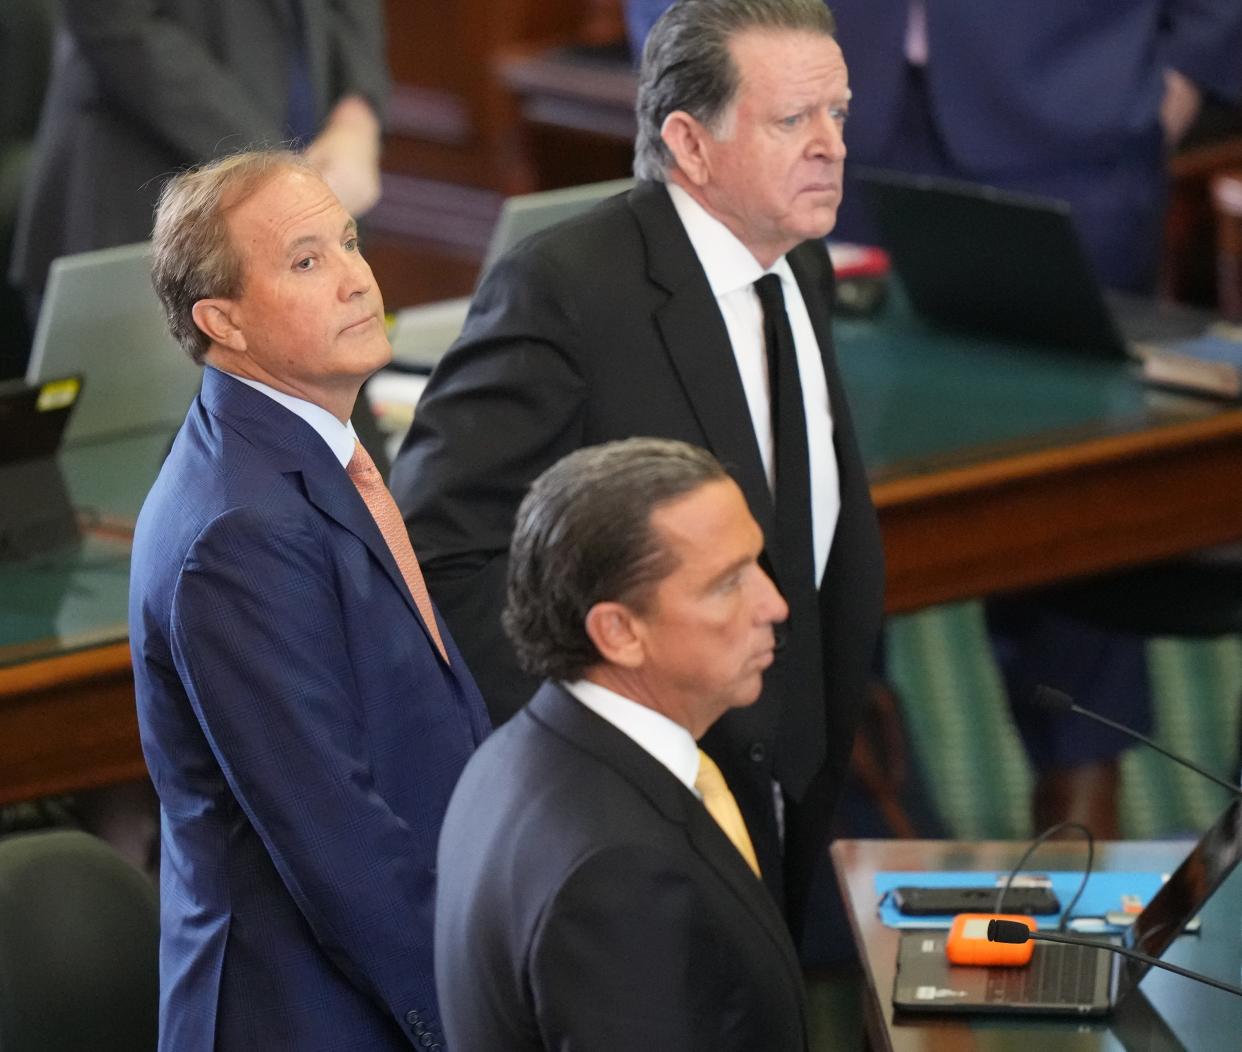 Attorney General Ken Paxton, middle, stands with his attorneys Tony Buzbee and Dan Cogdell at his Senate impeachment trial Sept. 5. With the impeachment over, the whistleblowers at the heart of the case want their lawsuit against the attorney general's office to continue.